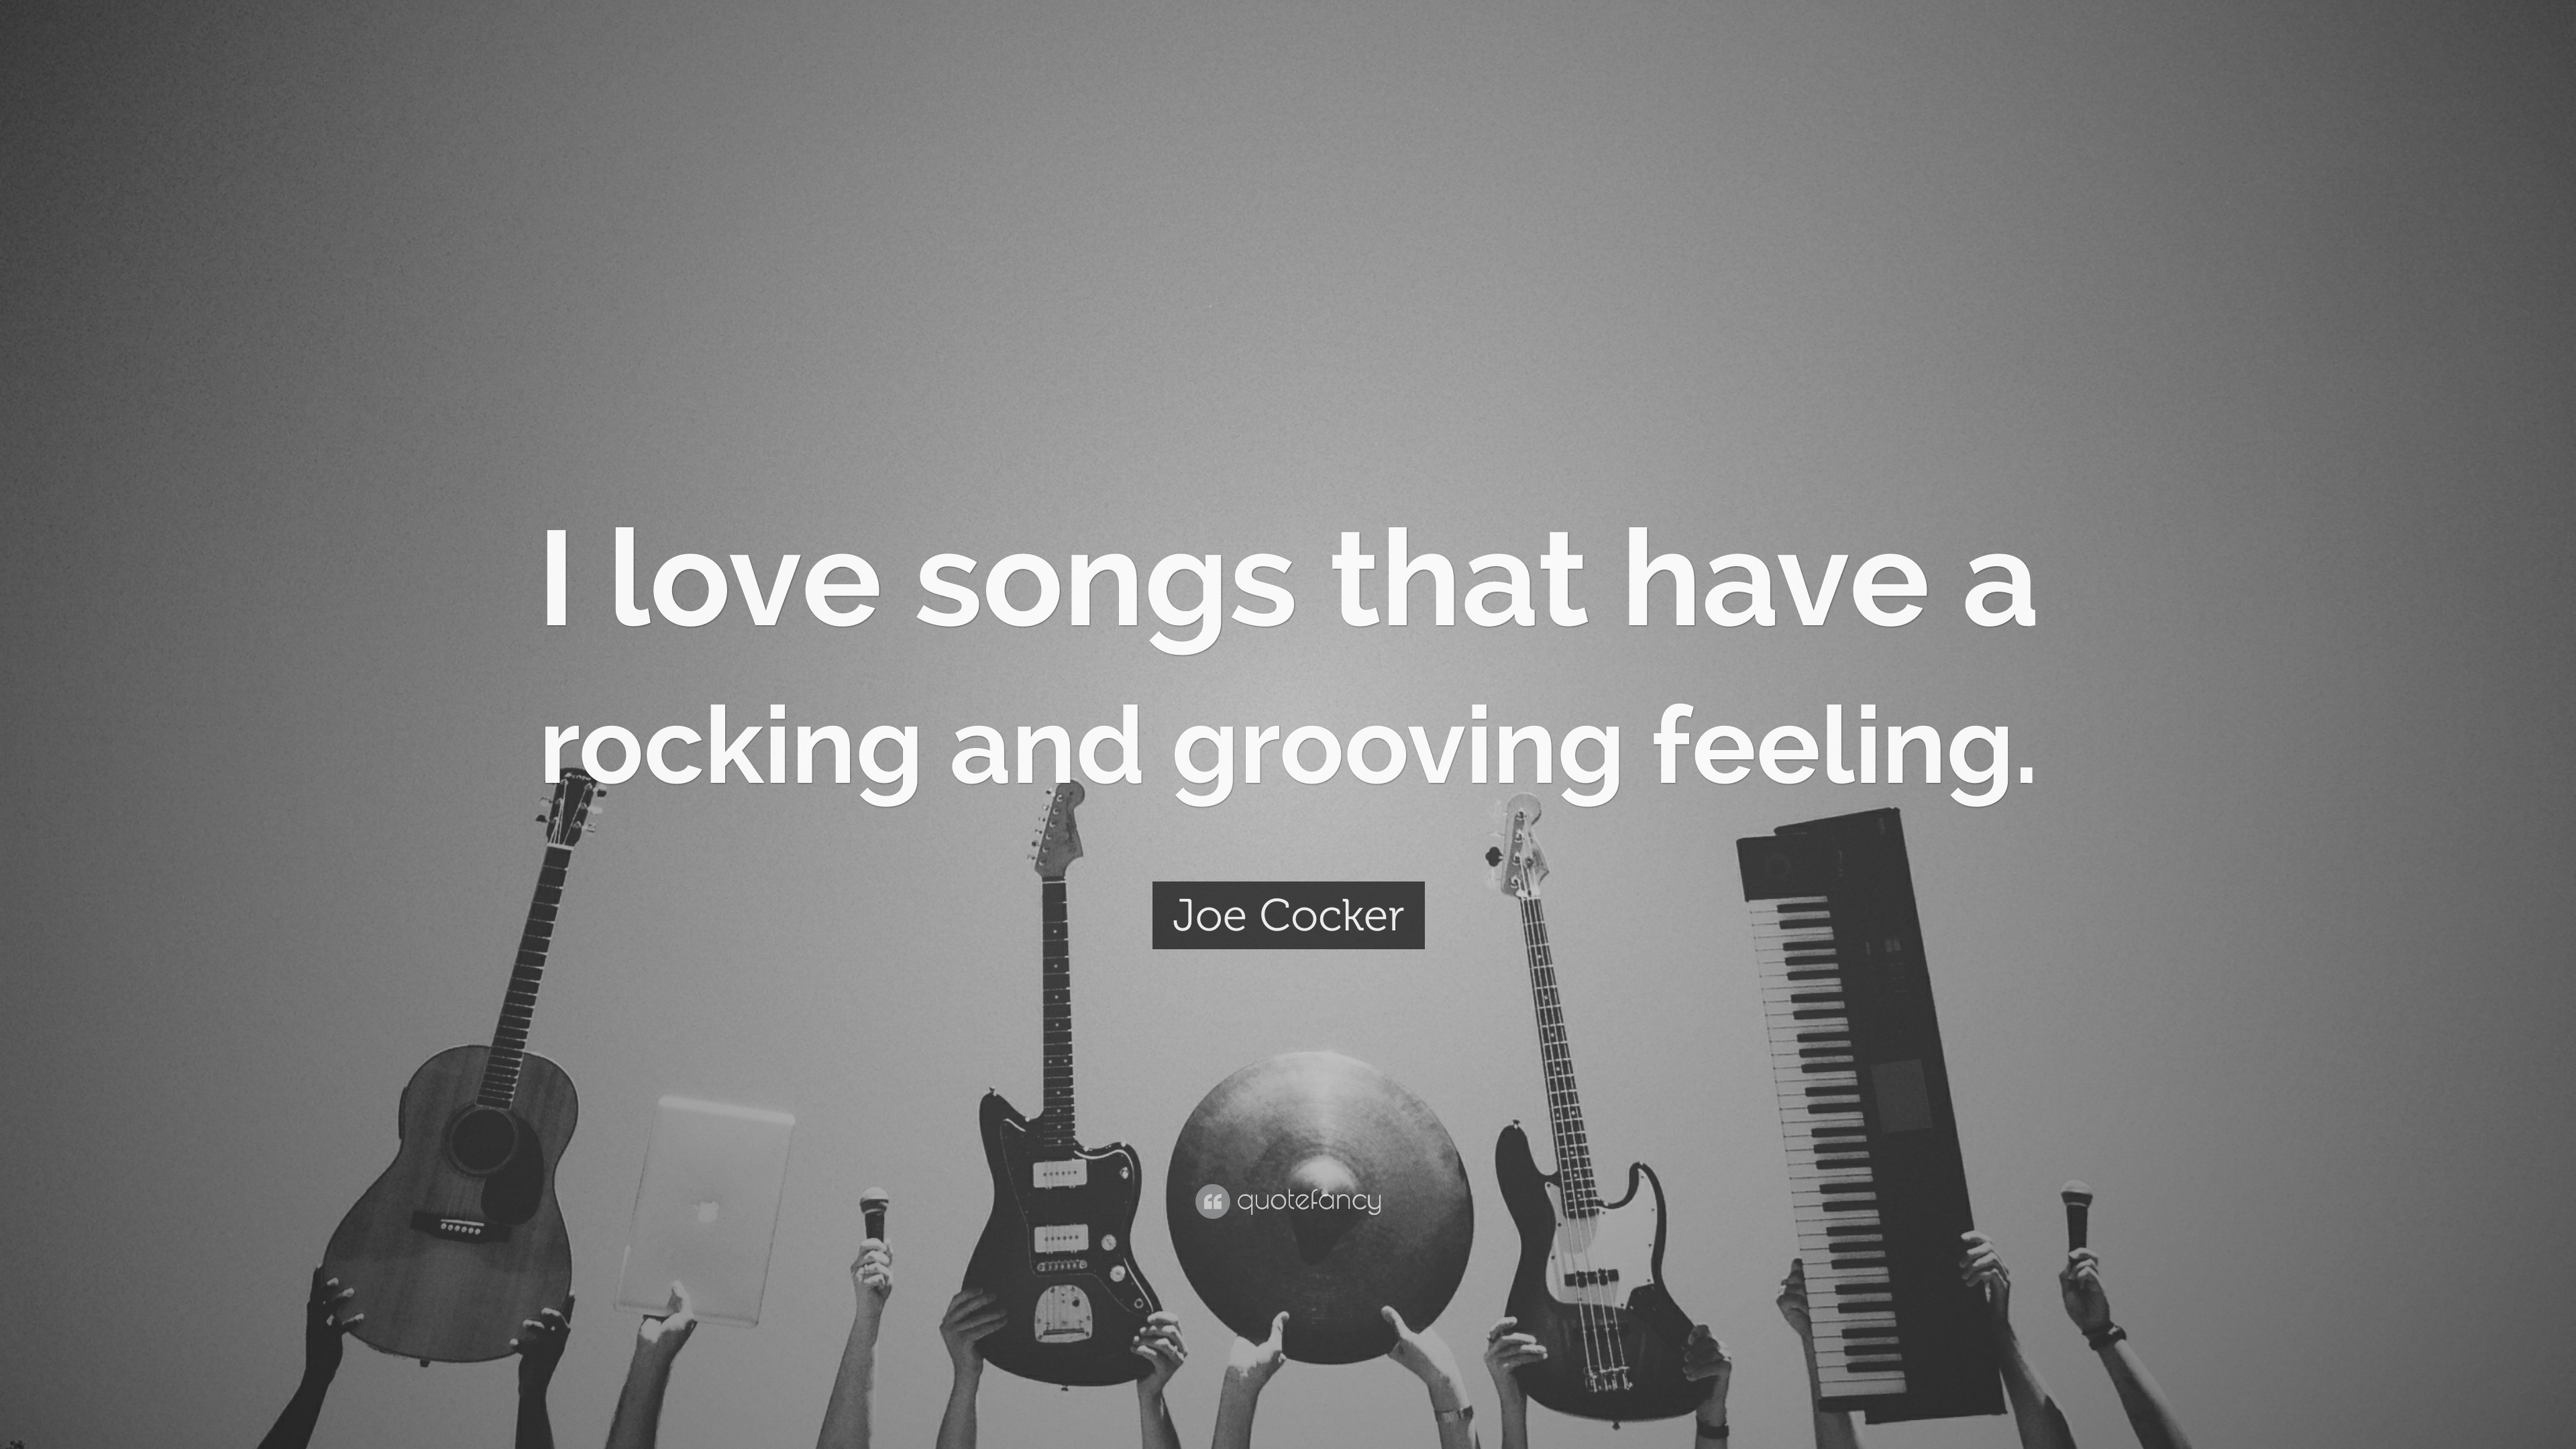 Joe Cocker Quote: “I love songs that have a rocking and grooving